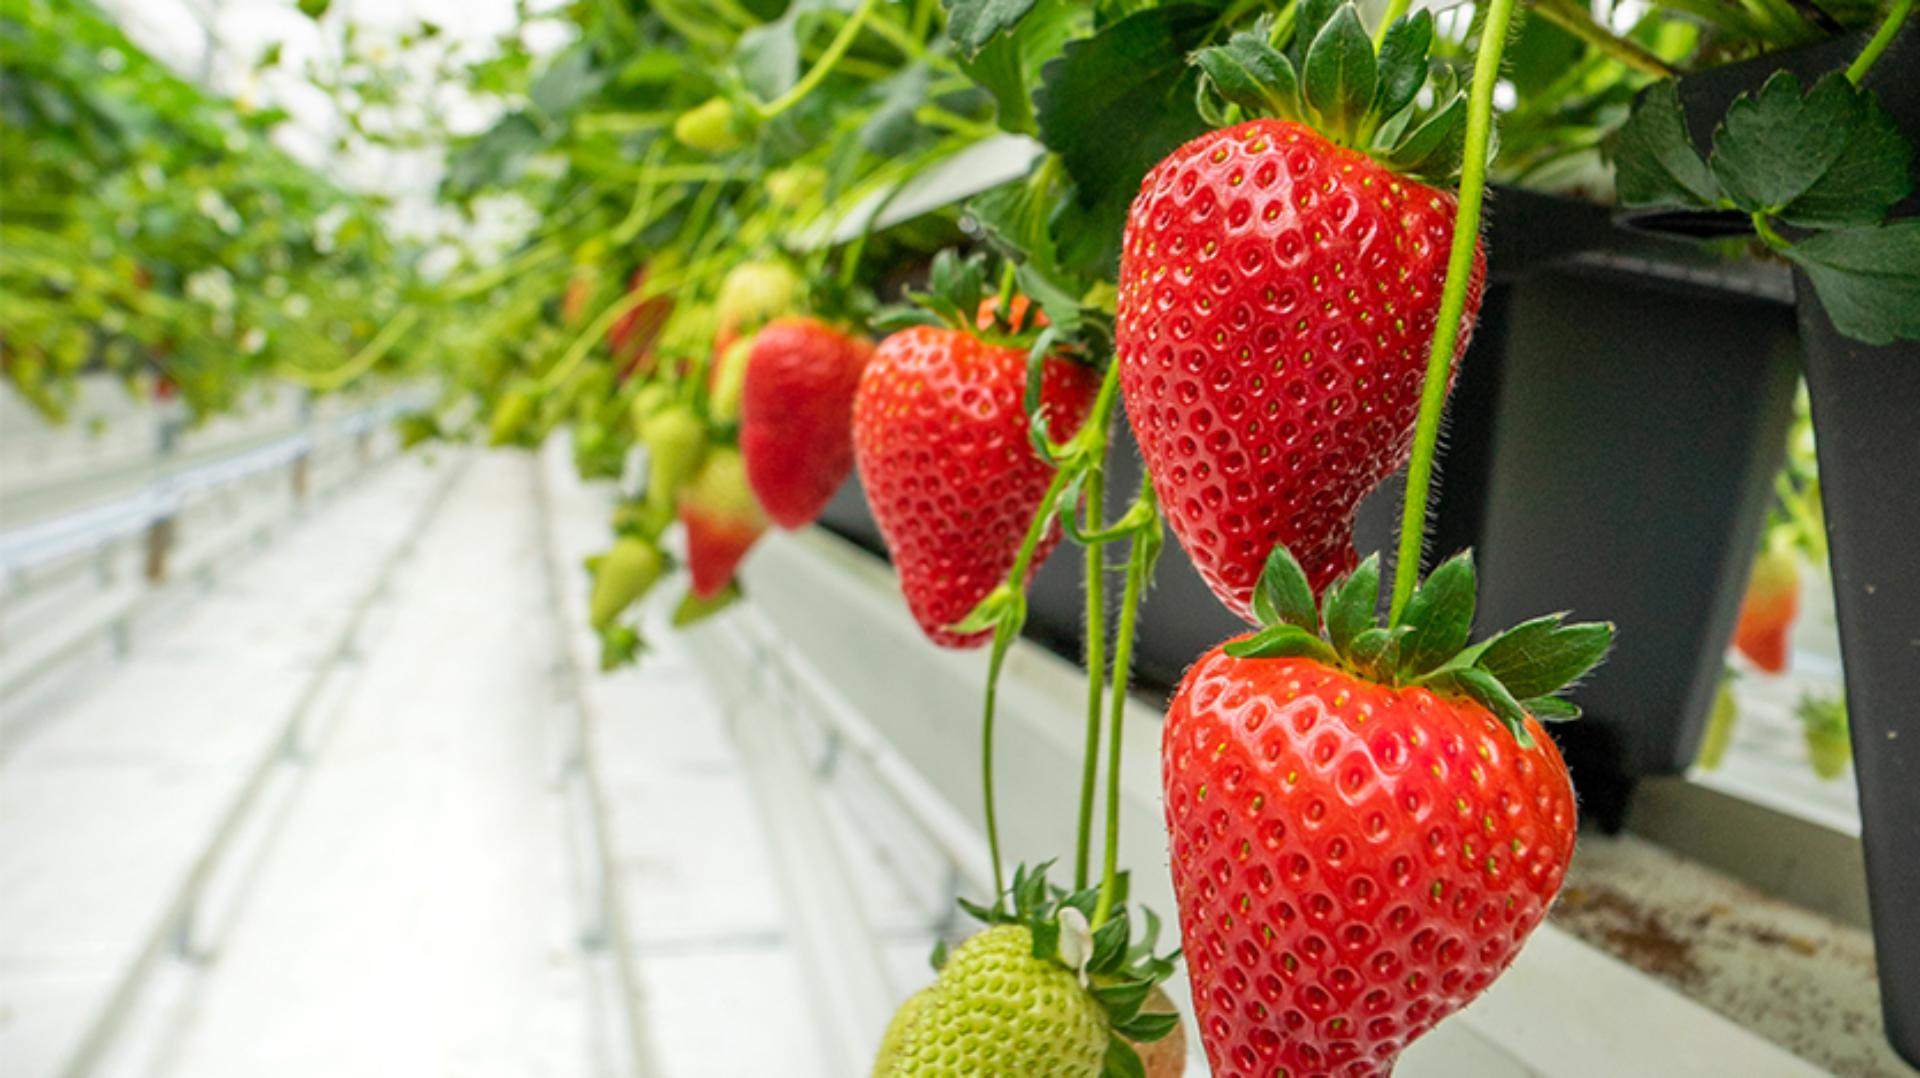 Dyson strawberries grown in the greenhouses in Lincolnshire